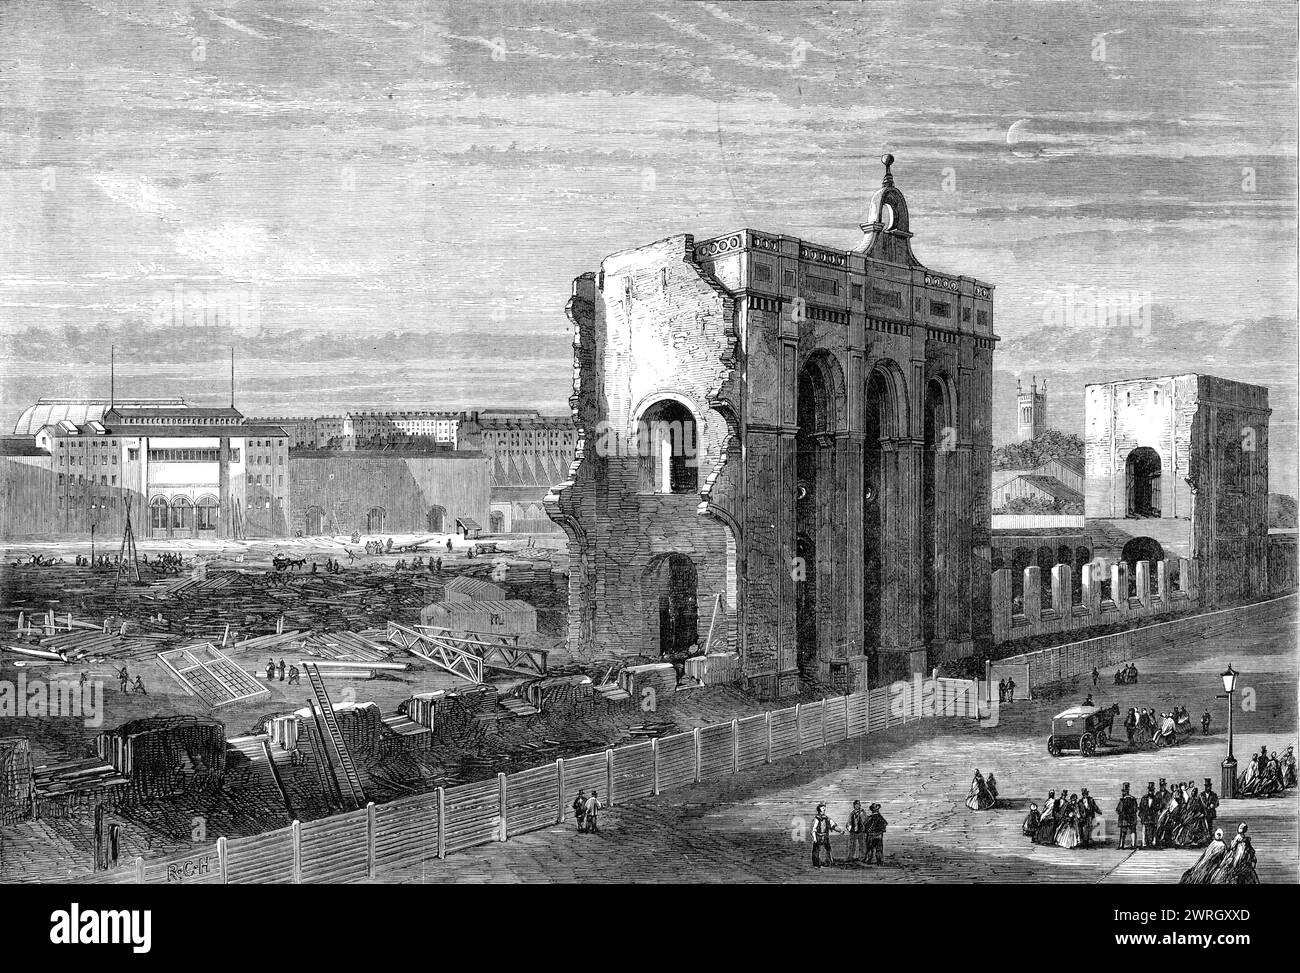 Ruins of the Great Exhibition Building of 1862, [London], (1864). Engraving from a sketch '...looking in an easterly direction along the Cromwell-road...The grand central entrance appears in the foreground; and, beyond this, a portion of the tower at the comer of the Exhibition-road. In the background are the buildings attached to the Gardens of the Horticultural Society, which mark the sight of the Exhibition Refreshment Rooms. On Tuesday last the Engineers and labourers completed the clearing away the debris of the two towers in the Exhibition-road, which had been dislodged by gunpowder. Pro Stock Photo